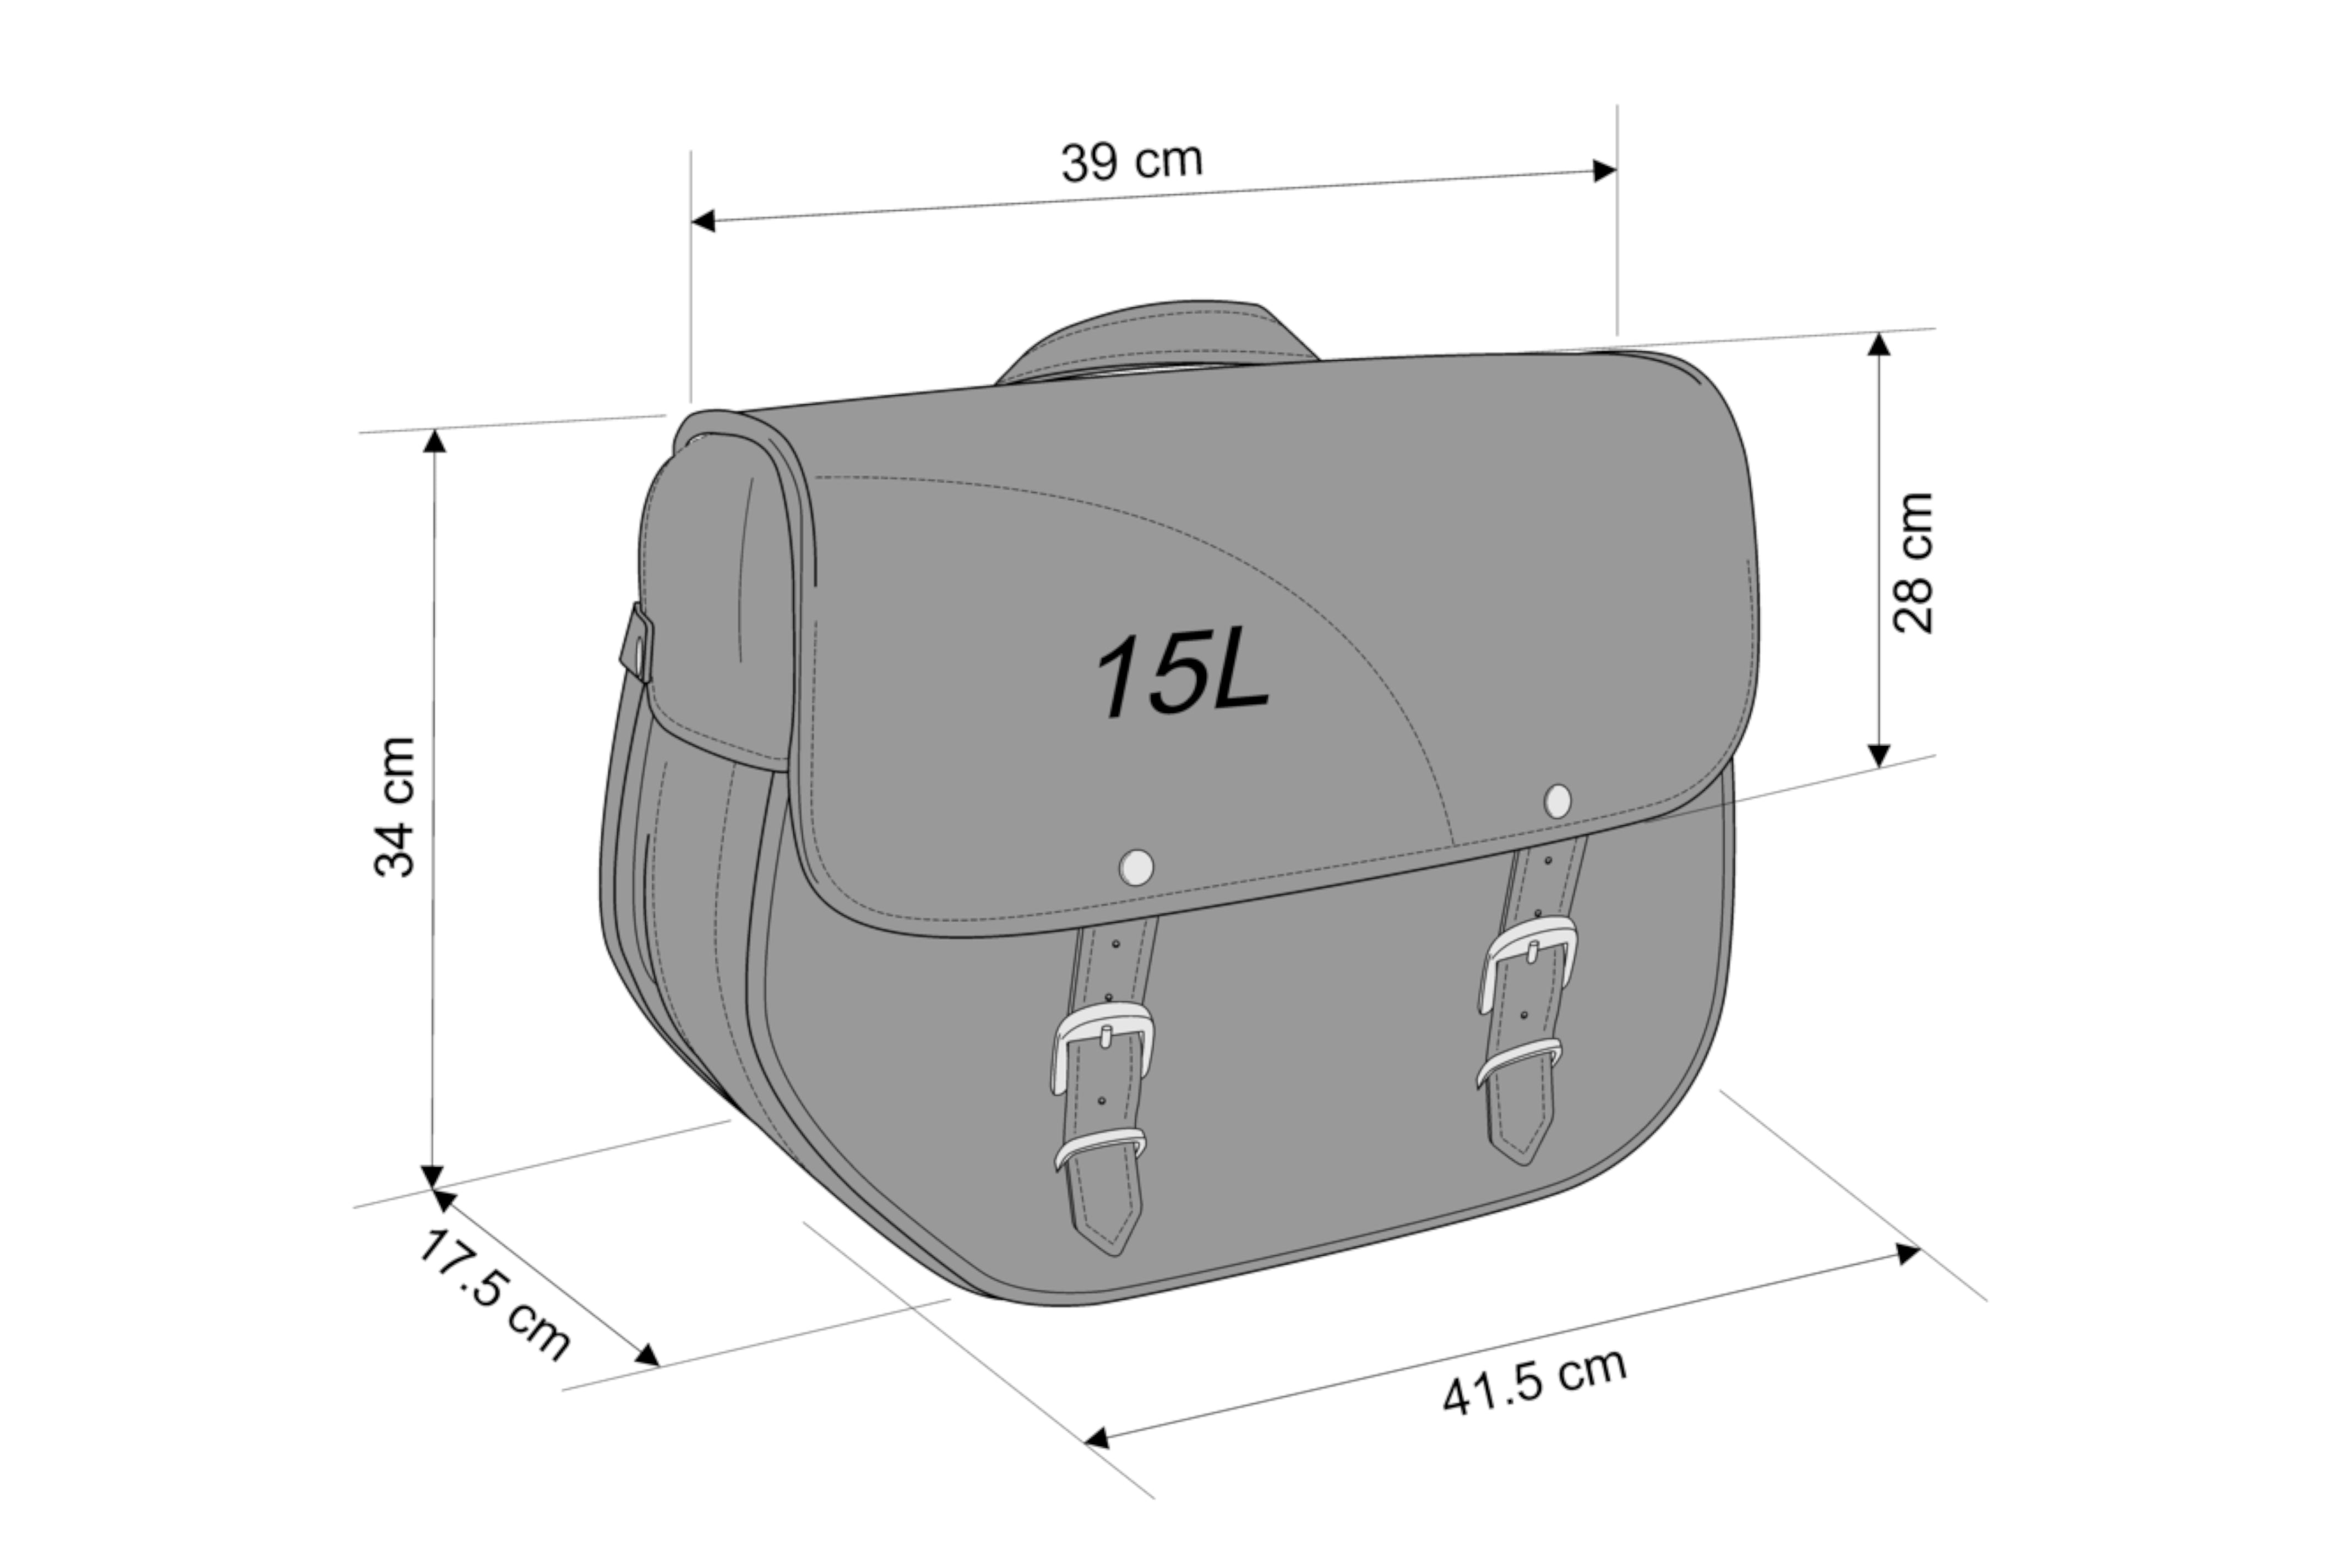 Customacces Sant Louis Saddlebags Without Metal Base - No Support Included | Harley Davidson Sportster 1200 Roadster (XL1200R) 2004>2008-XAPS001N-Storage-Pyramid Motorcycle Accessories